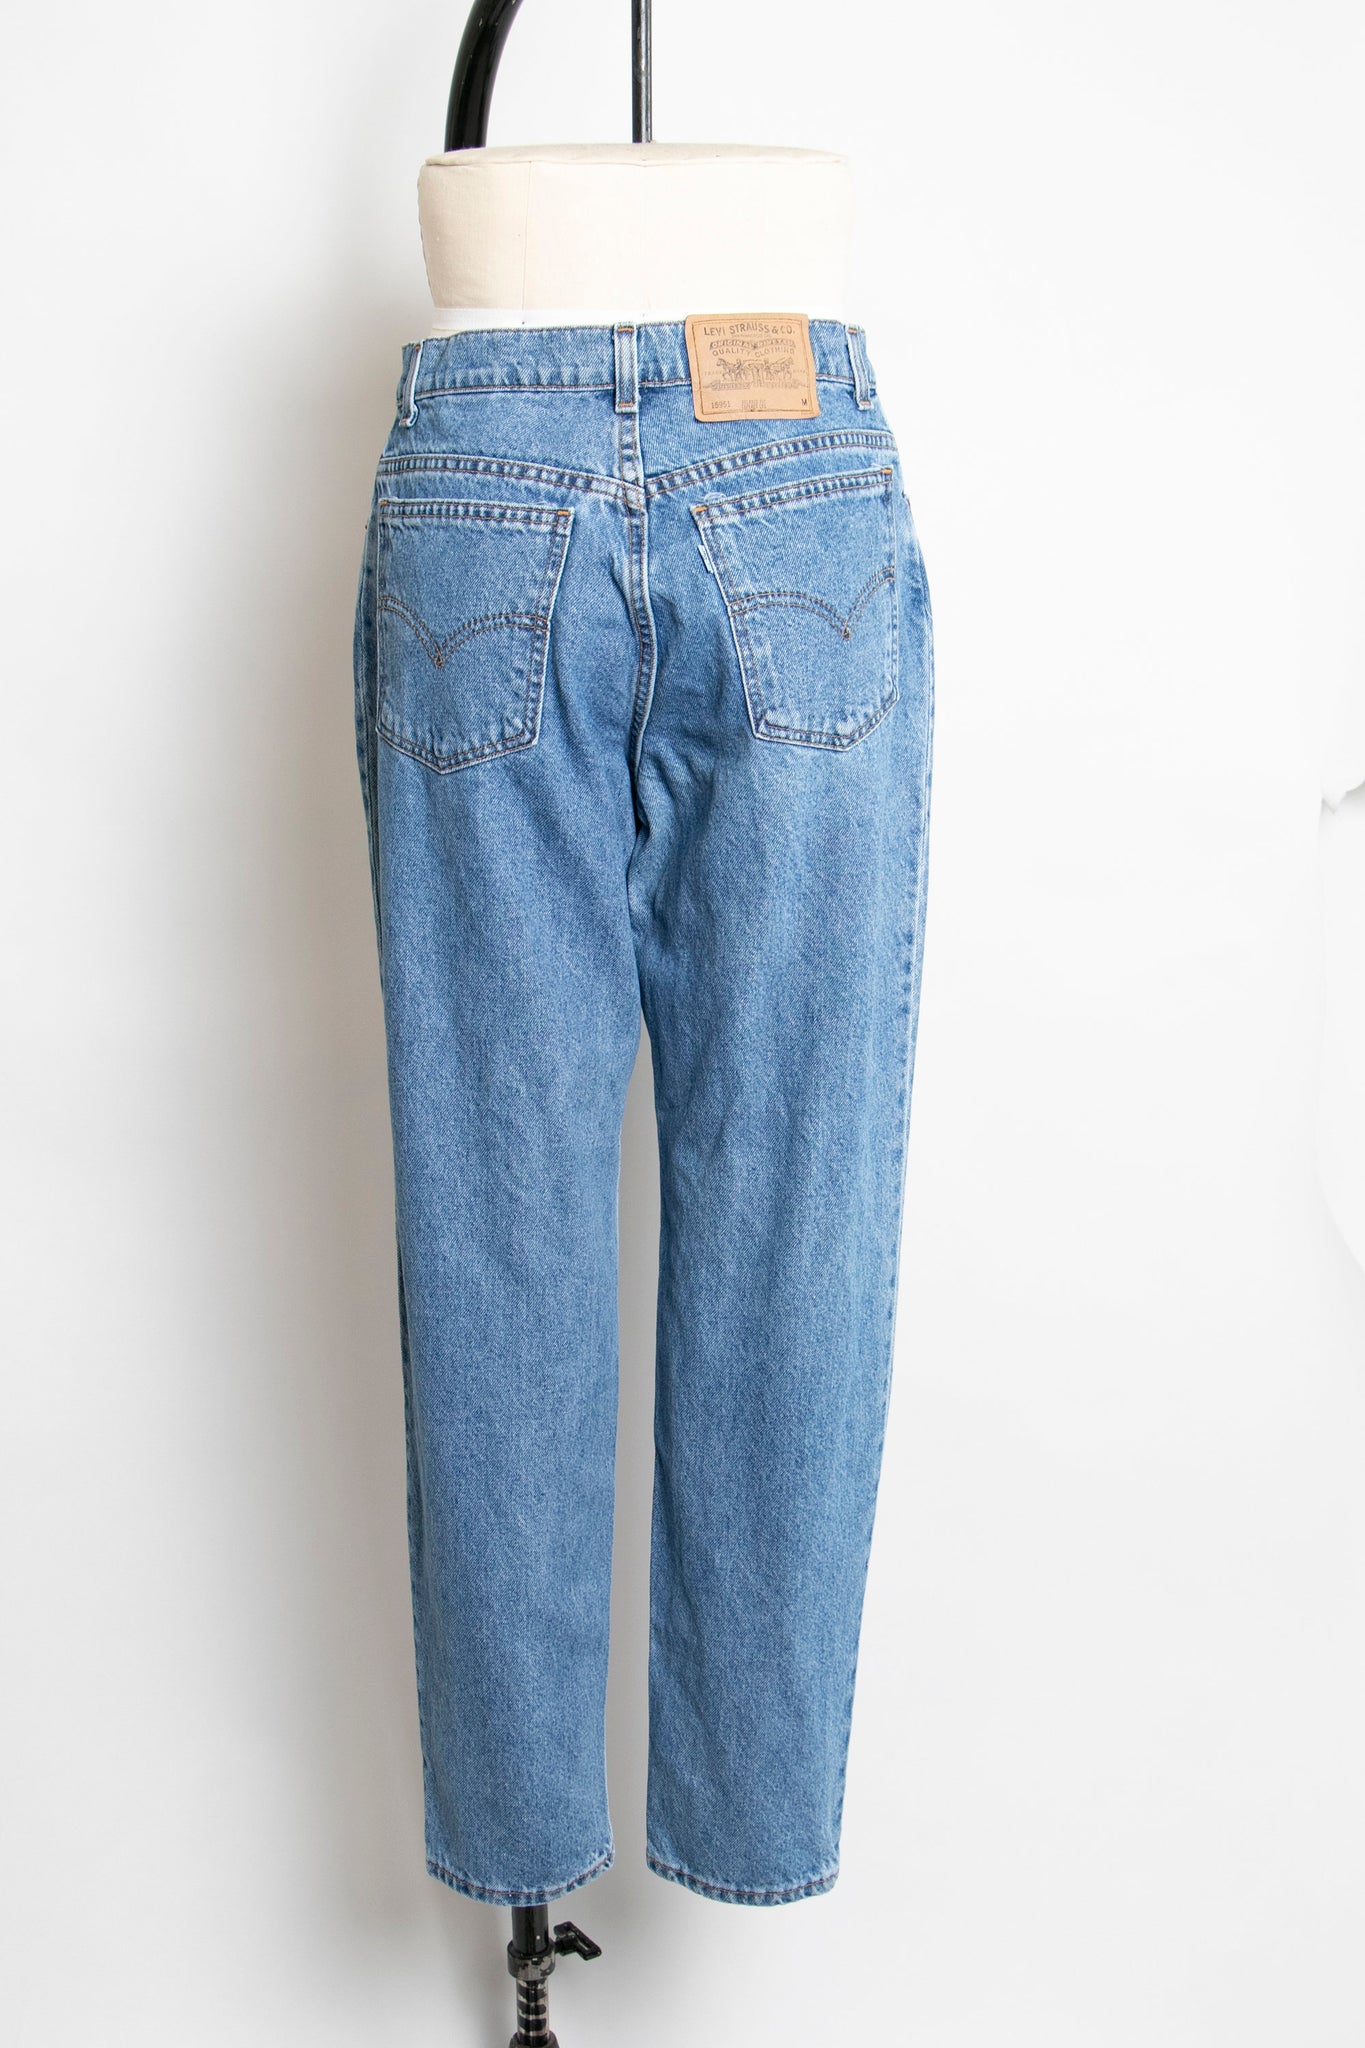 Levis Jeans 90s Tapered Levis Mom Jeans High Waist Levi Strauss